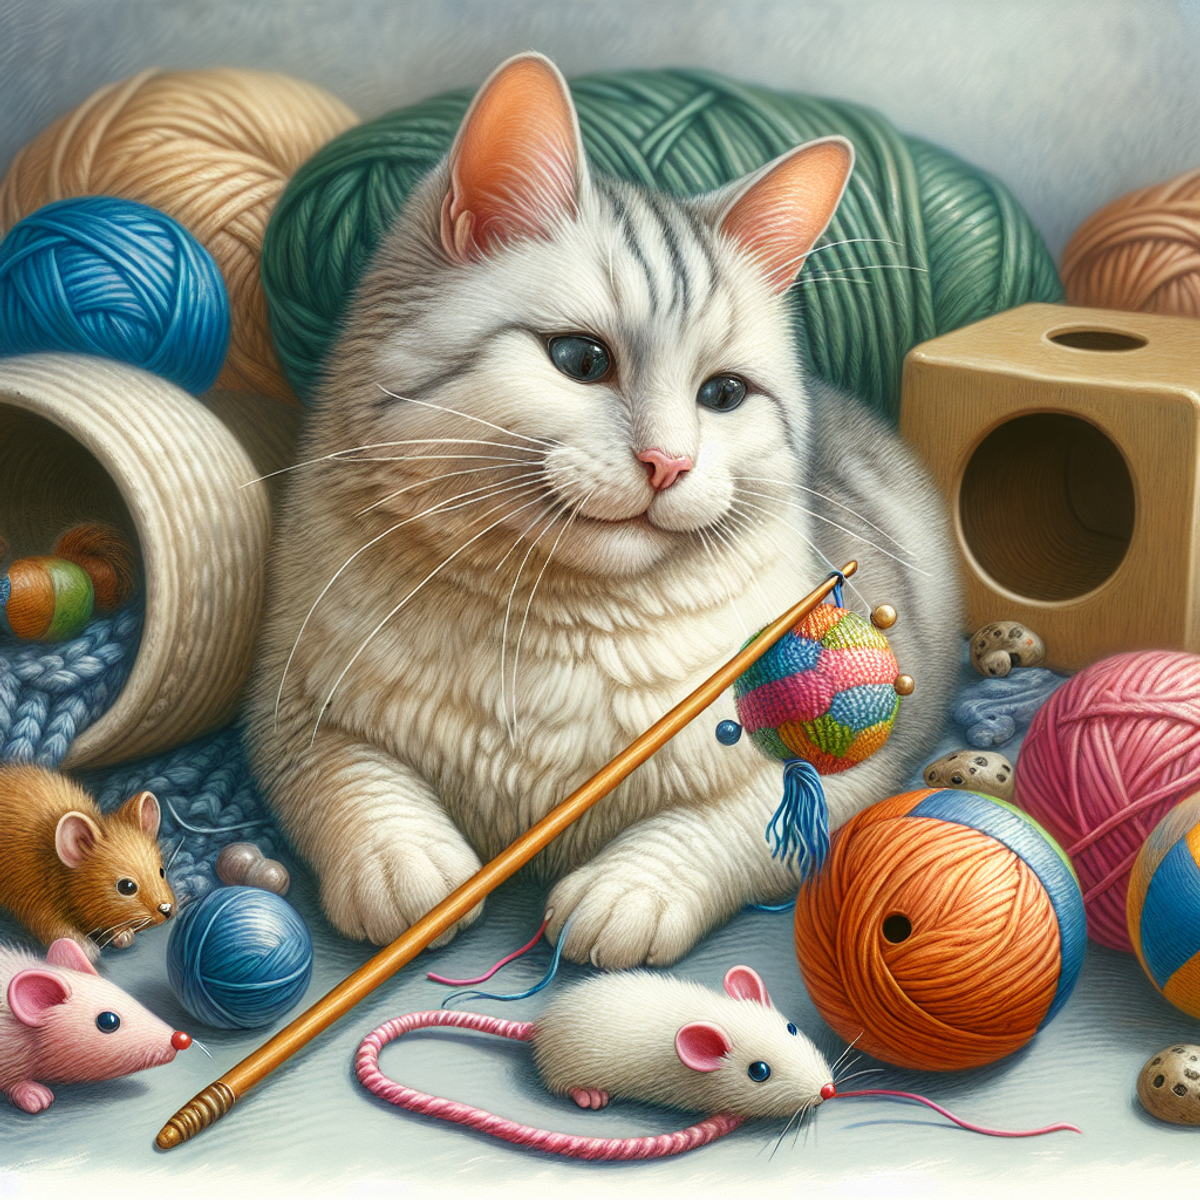 An elderly cat with gray fur surrounded by toys, including a bundle of knitting yarn, a plush mouse, a jingling ball, a feather on a stick, and a cat